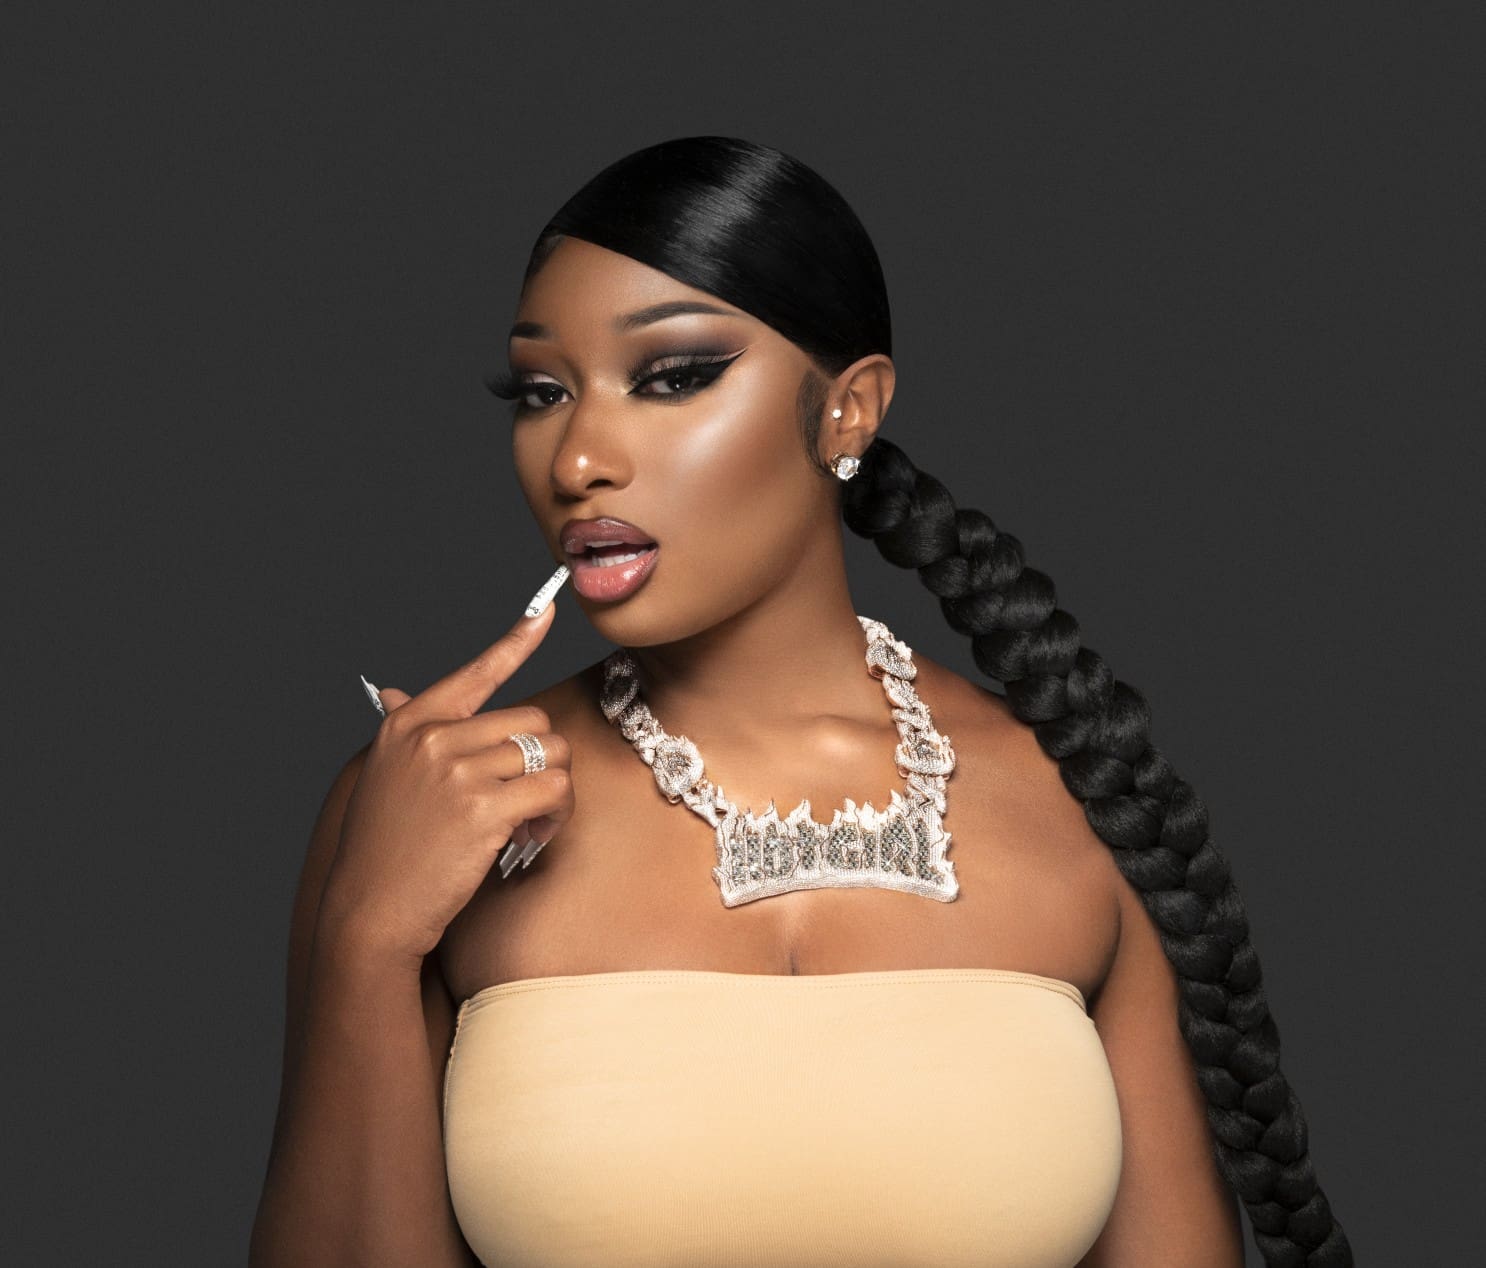 megan-thee-stallion-shows-off-her-collection-see-her-juicy-curves-here